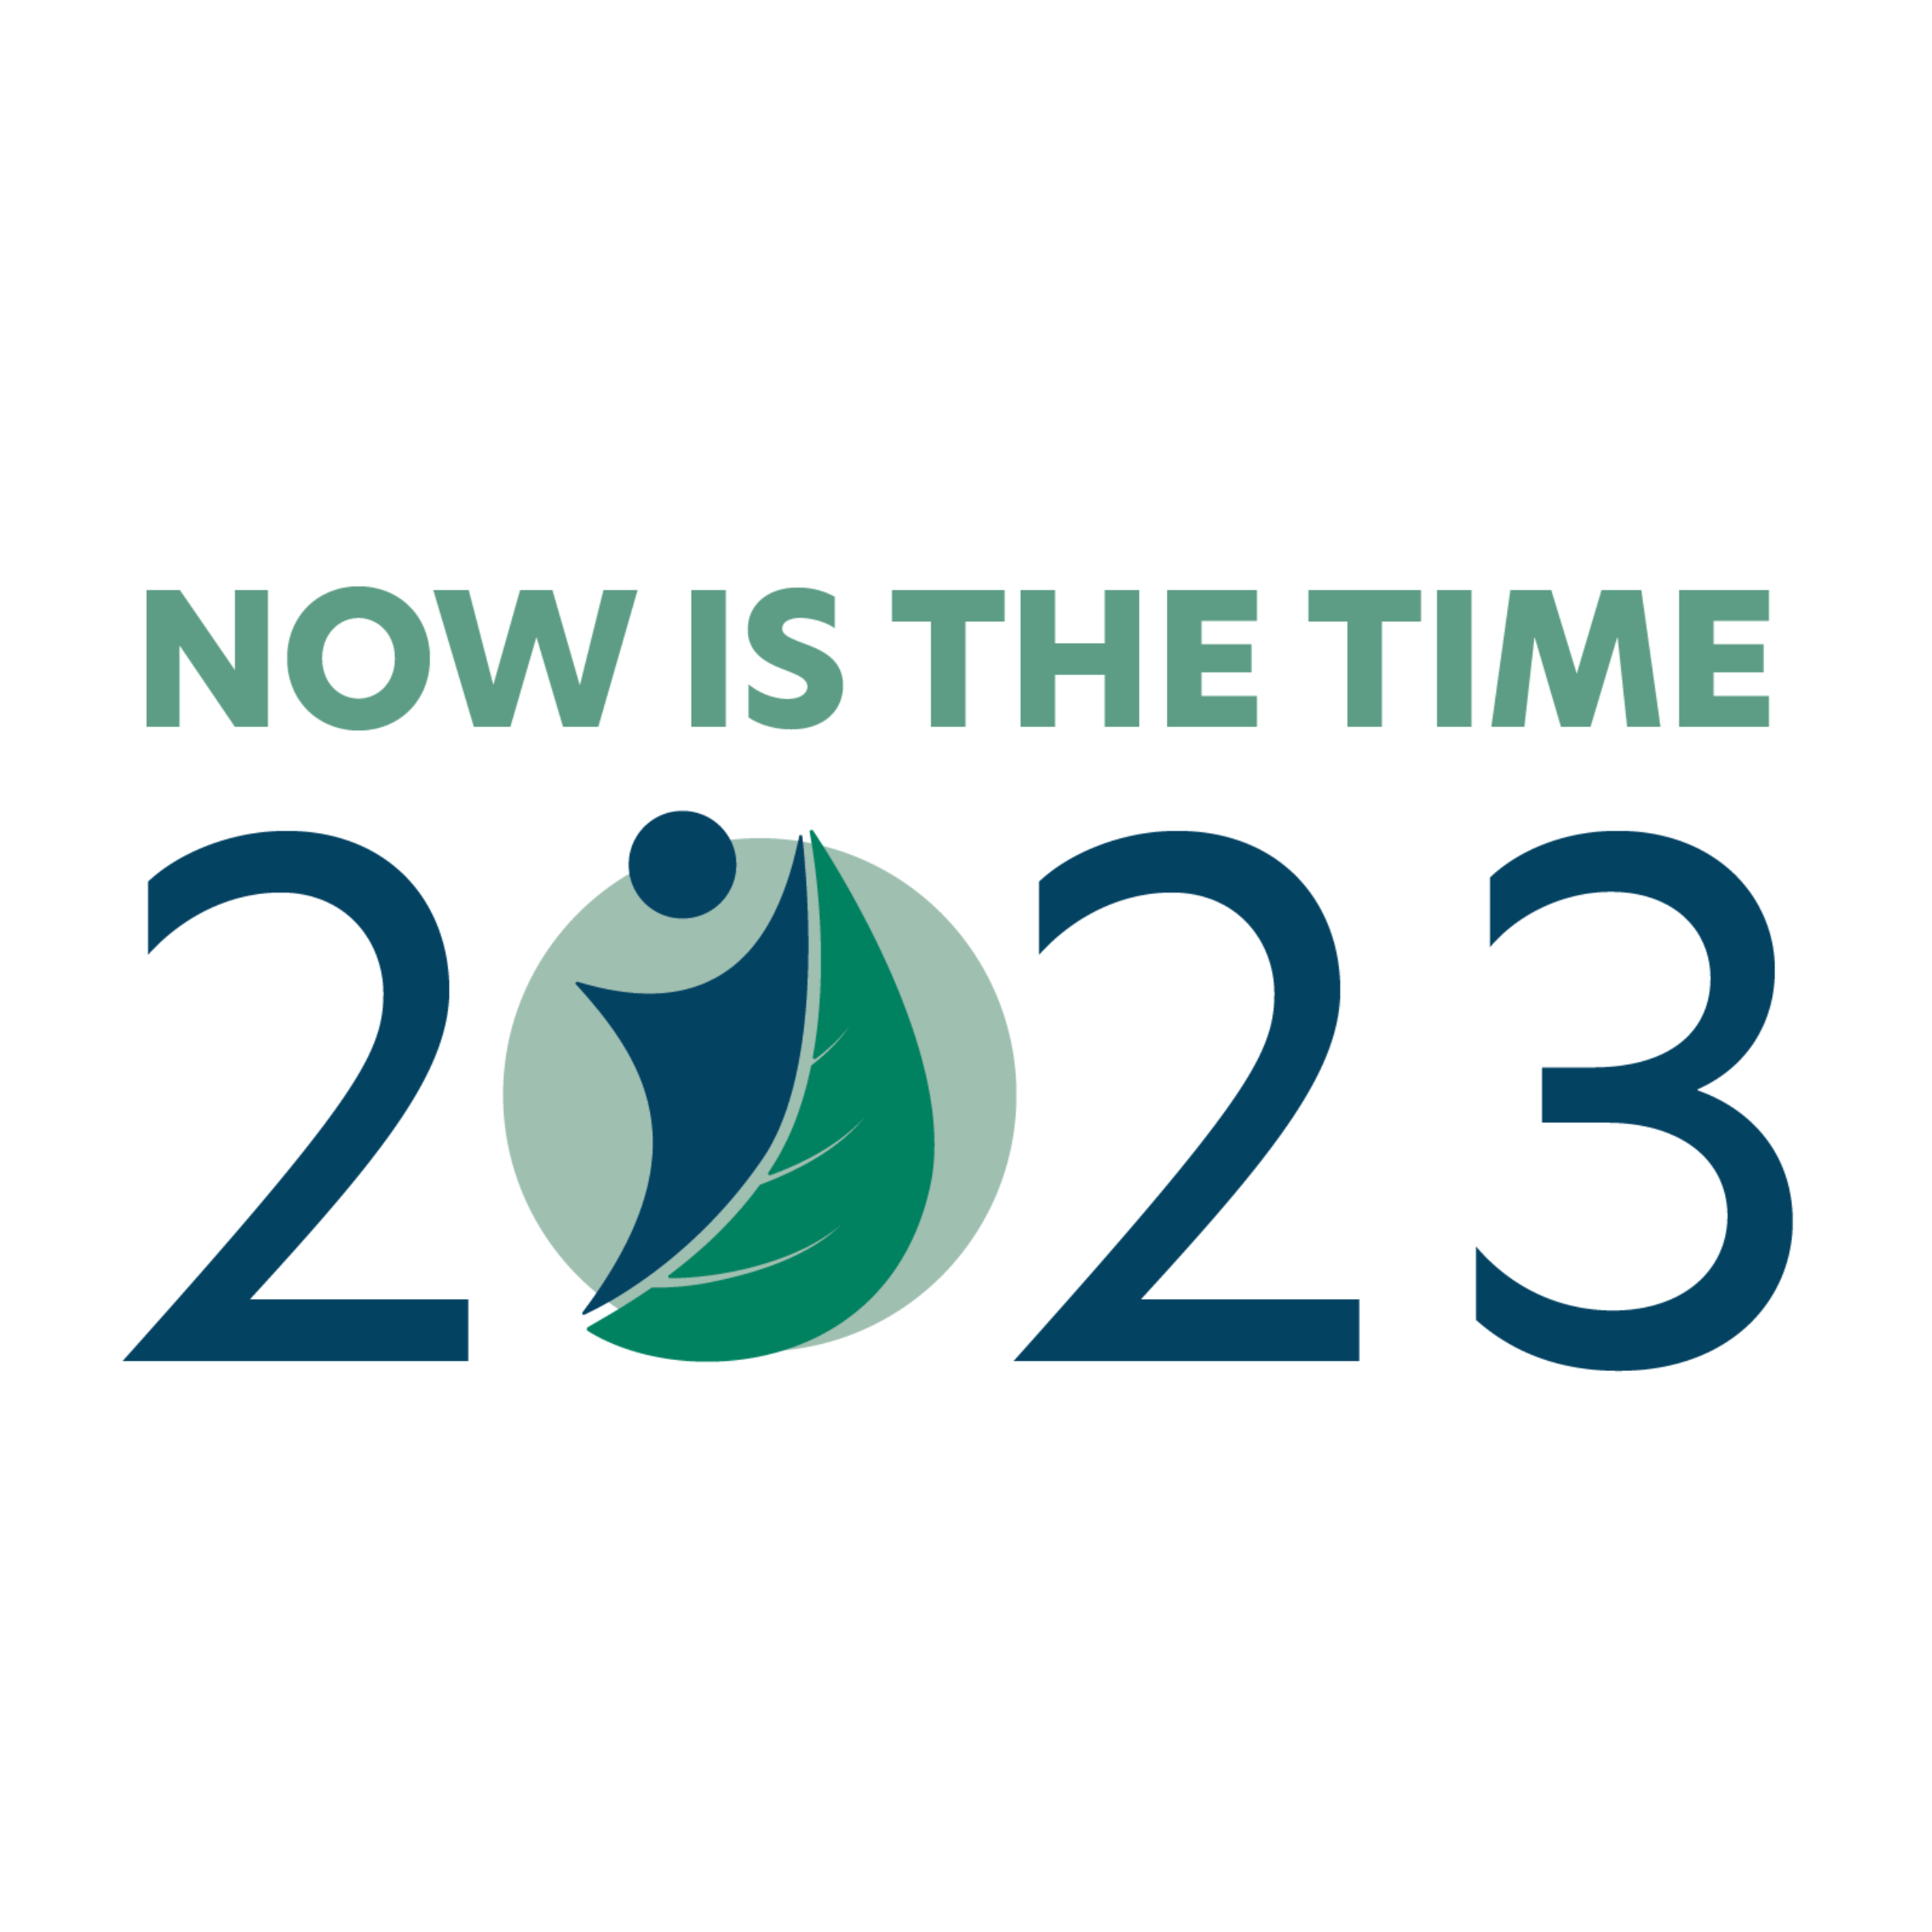 Now Is The Time 2022